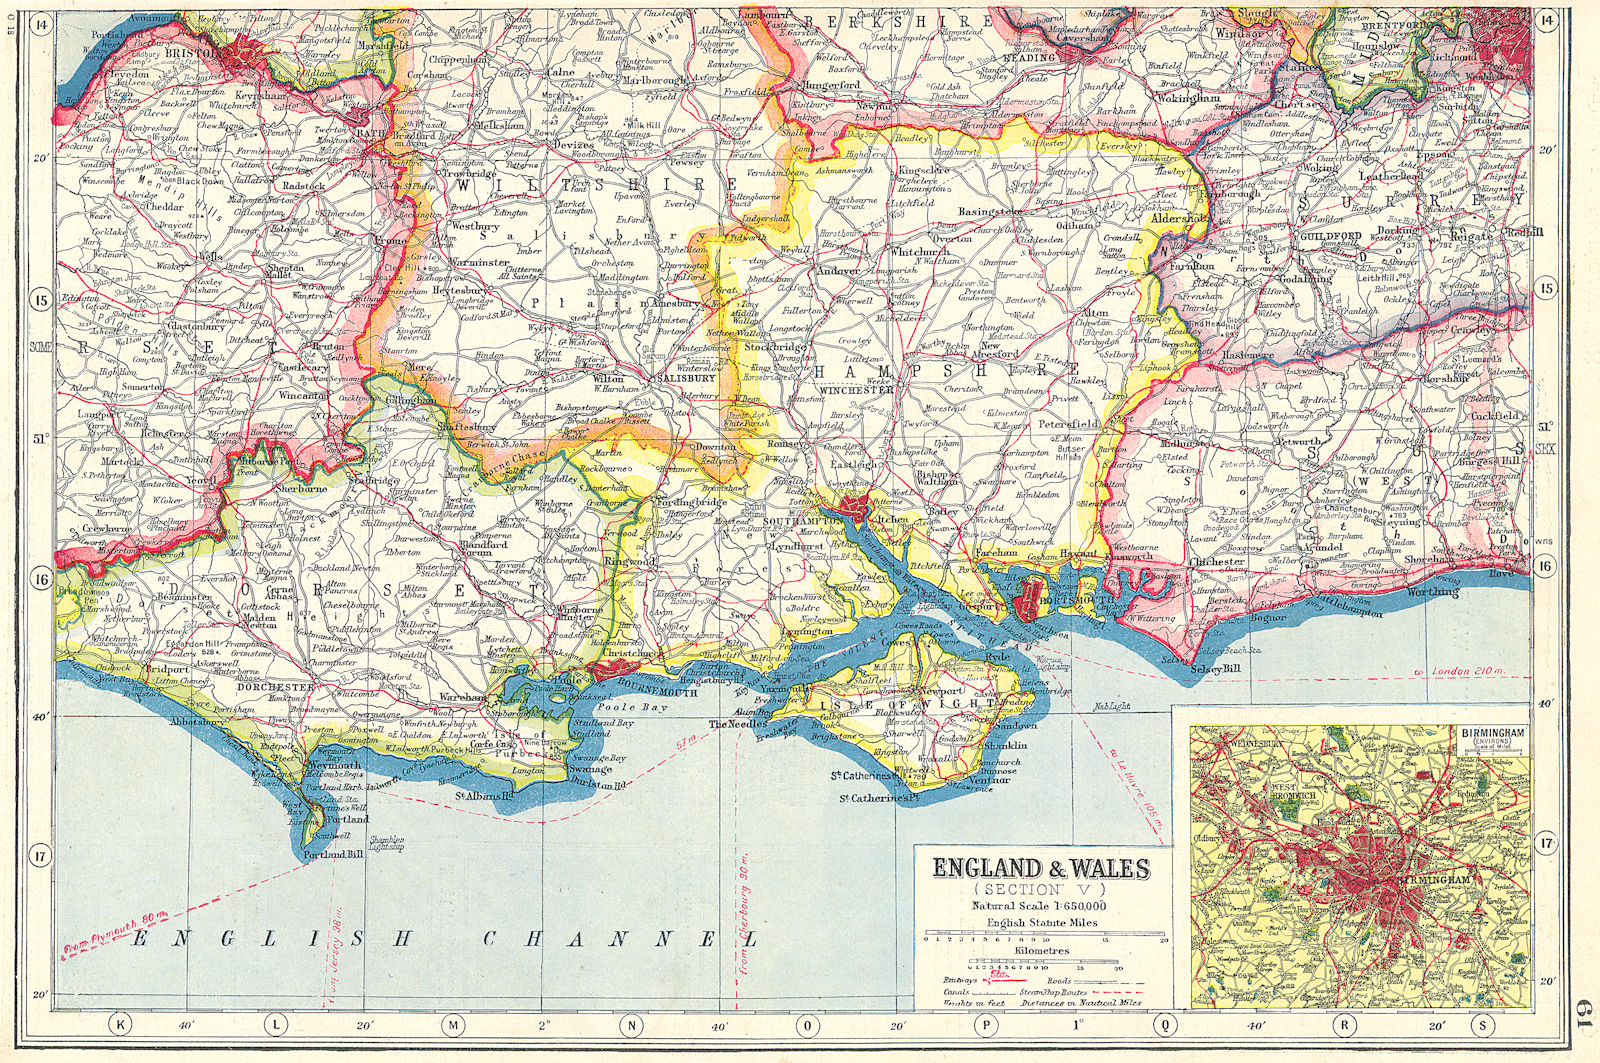 ENGLAND SOUTH. hampshire Isle of Wight Dorset Sussex; Inset Birmingham 1920 map